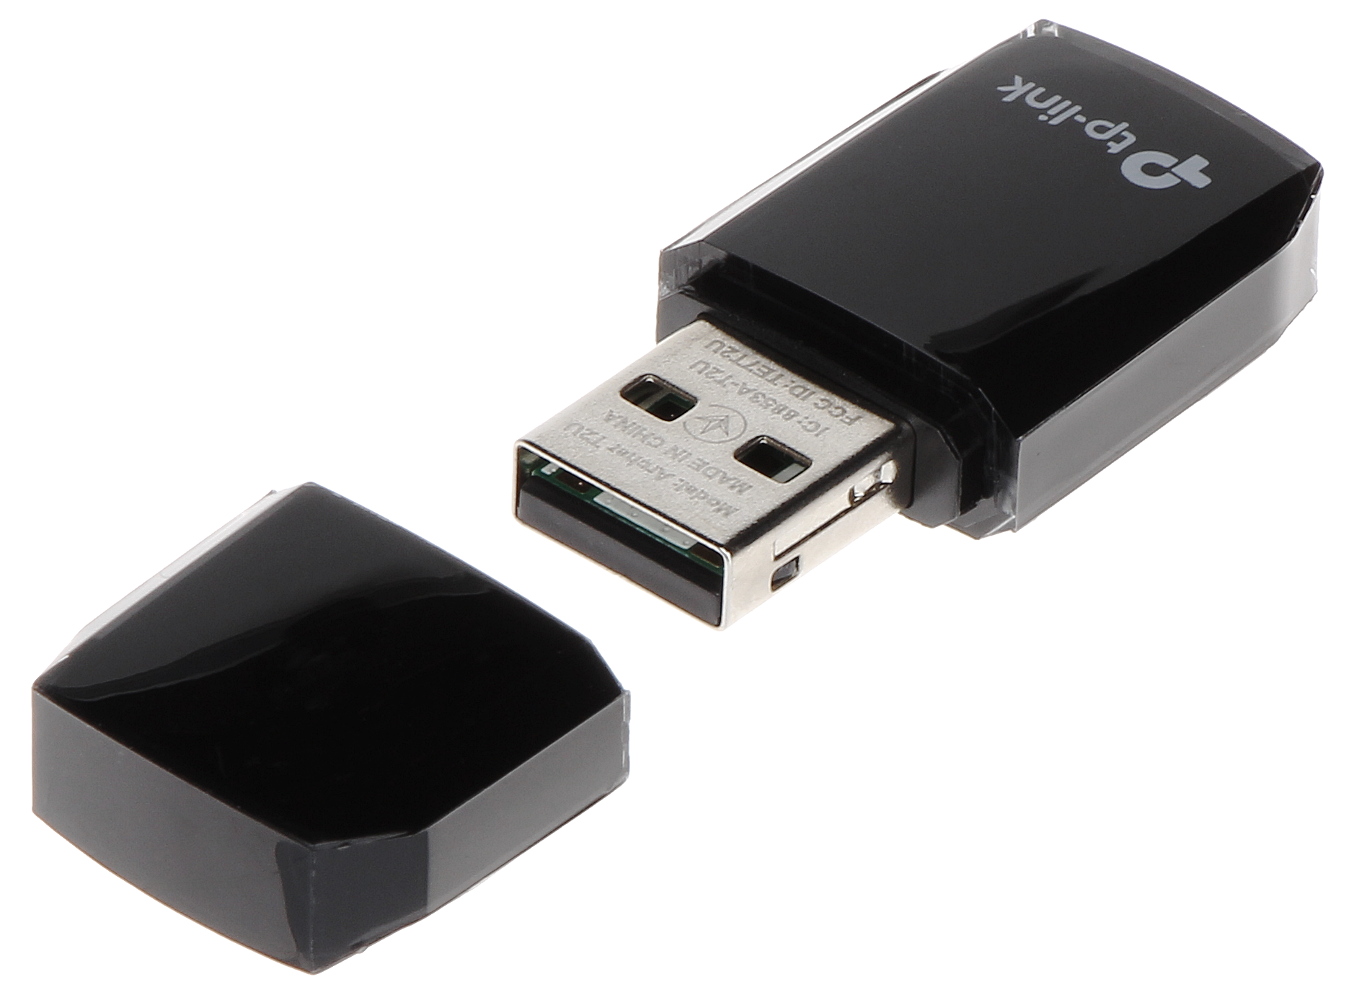 WLAN USB ADAPTER ARCHER-T2U 150 Mbps @ 2.4 GHz, 433 Mb... - 2.4 GHz and 5  GHz Wireless Card Adapters - Delta